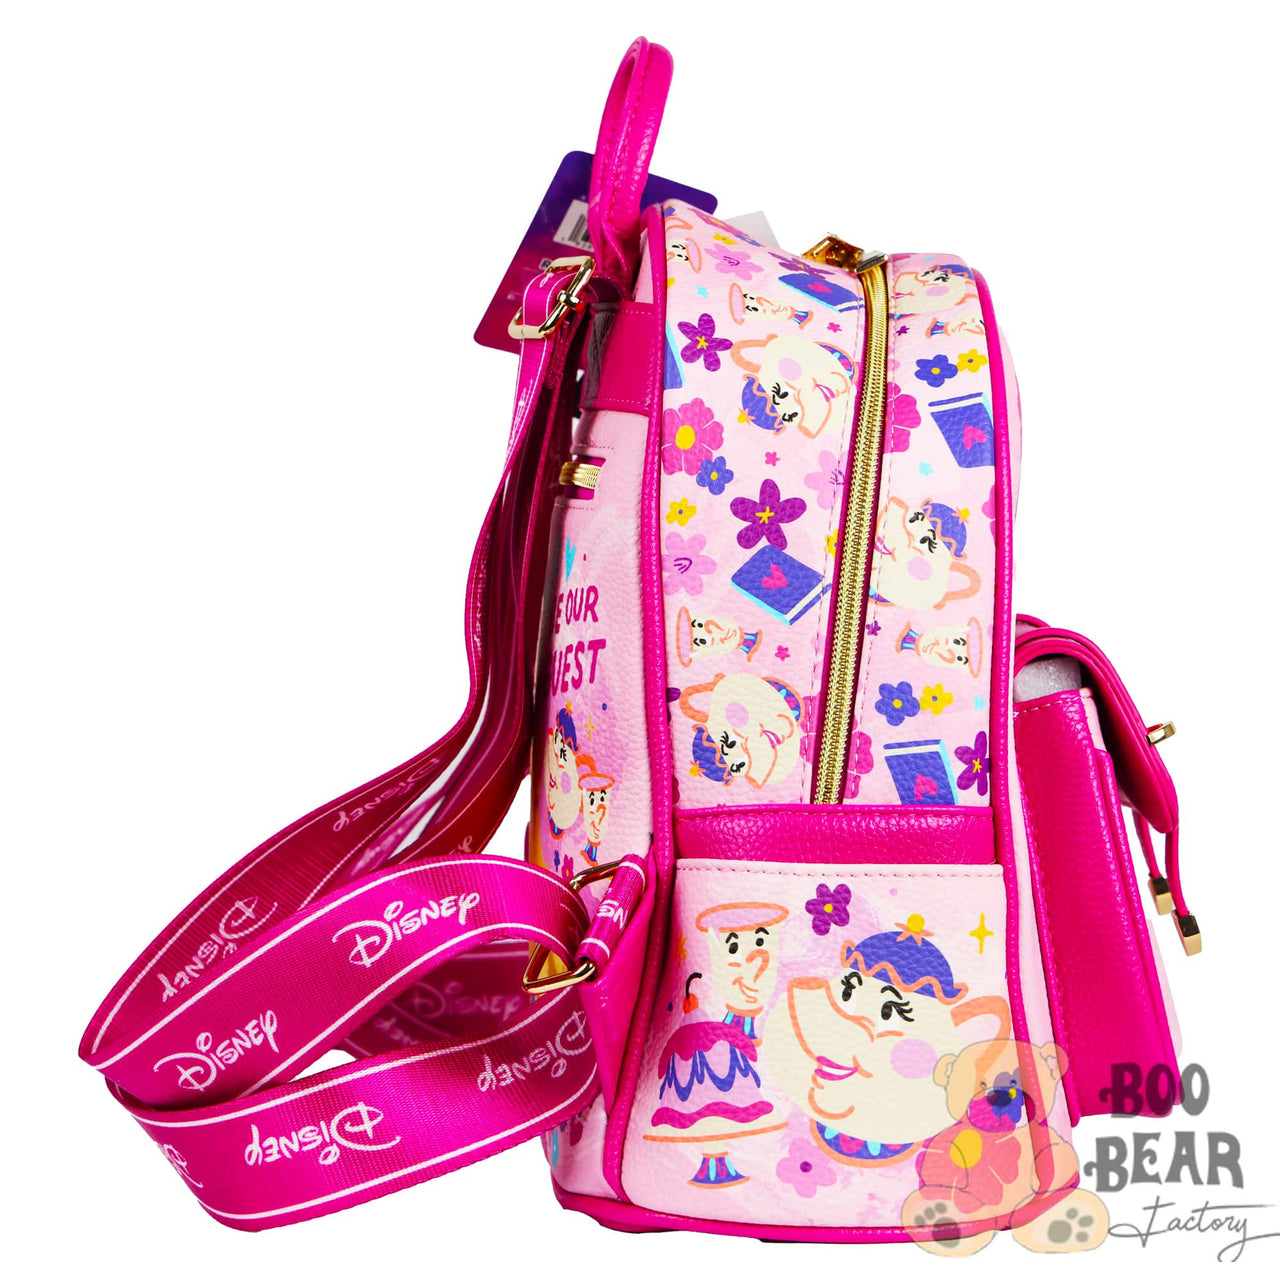 Beauty and Beast Disney Backpack right